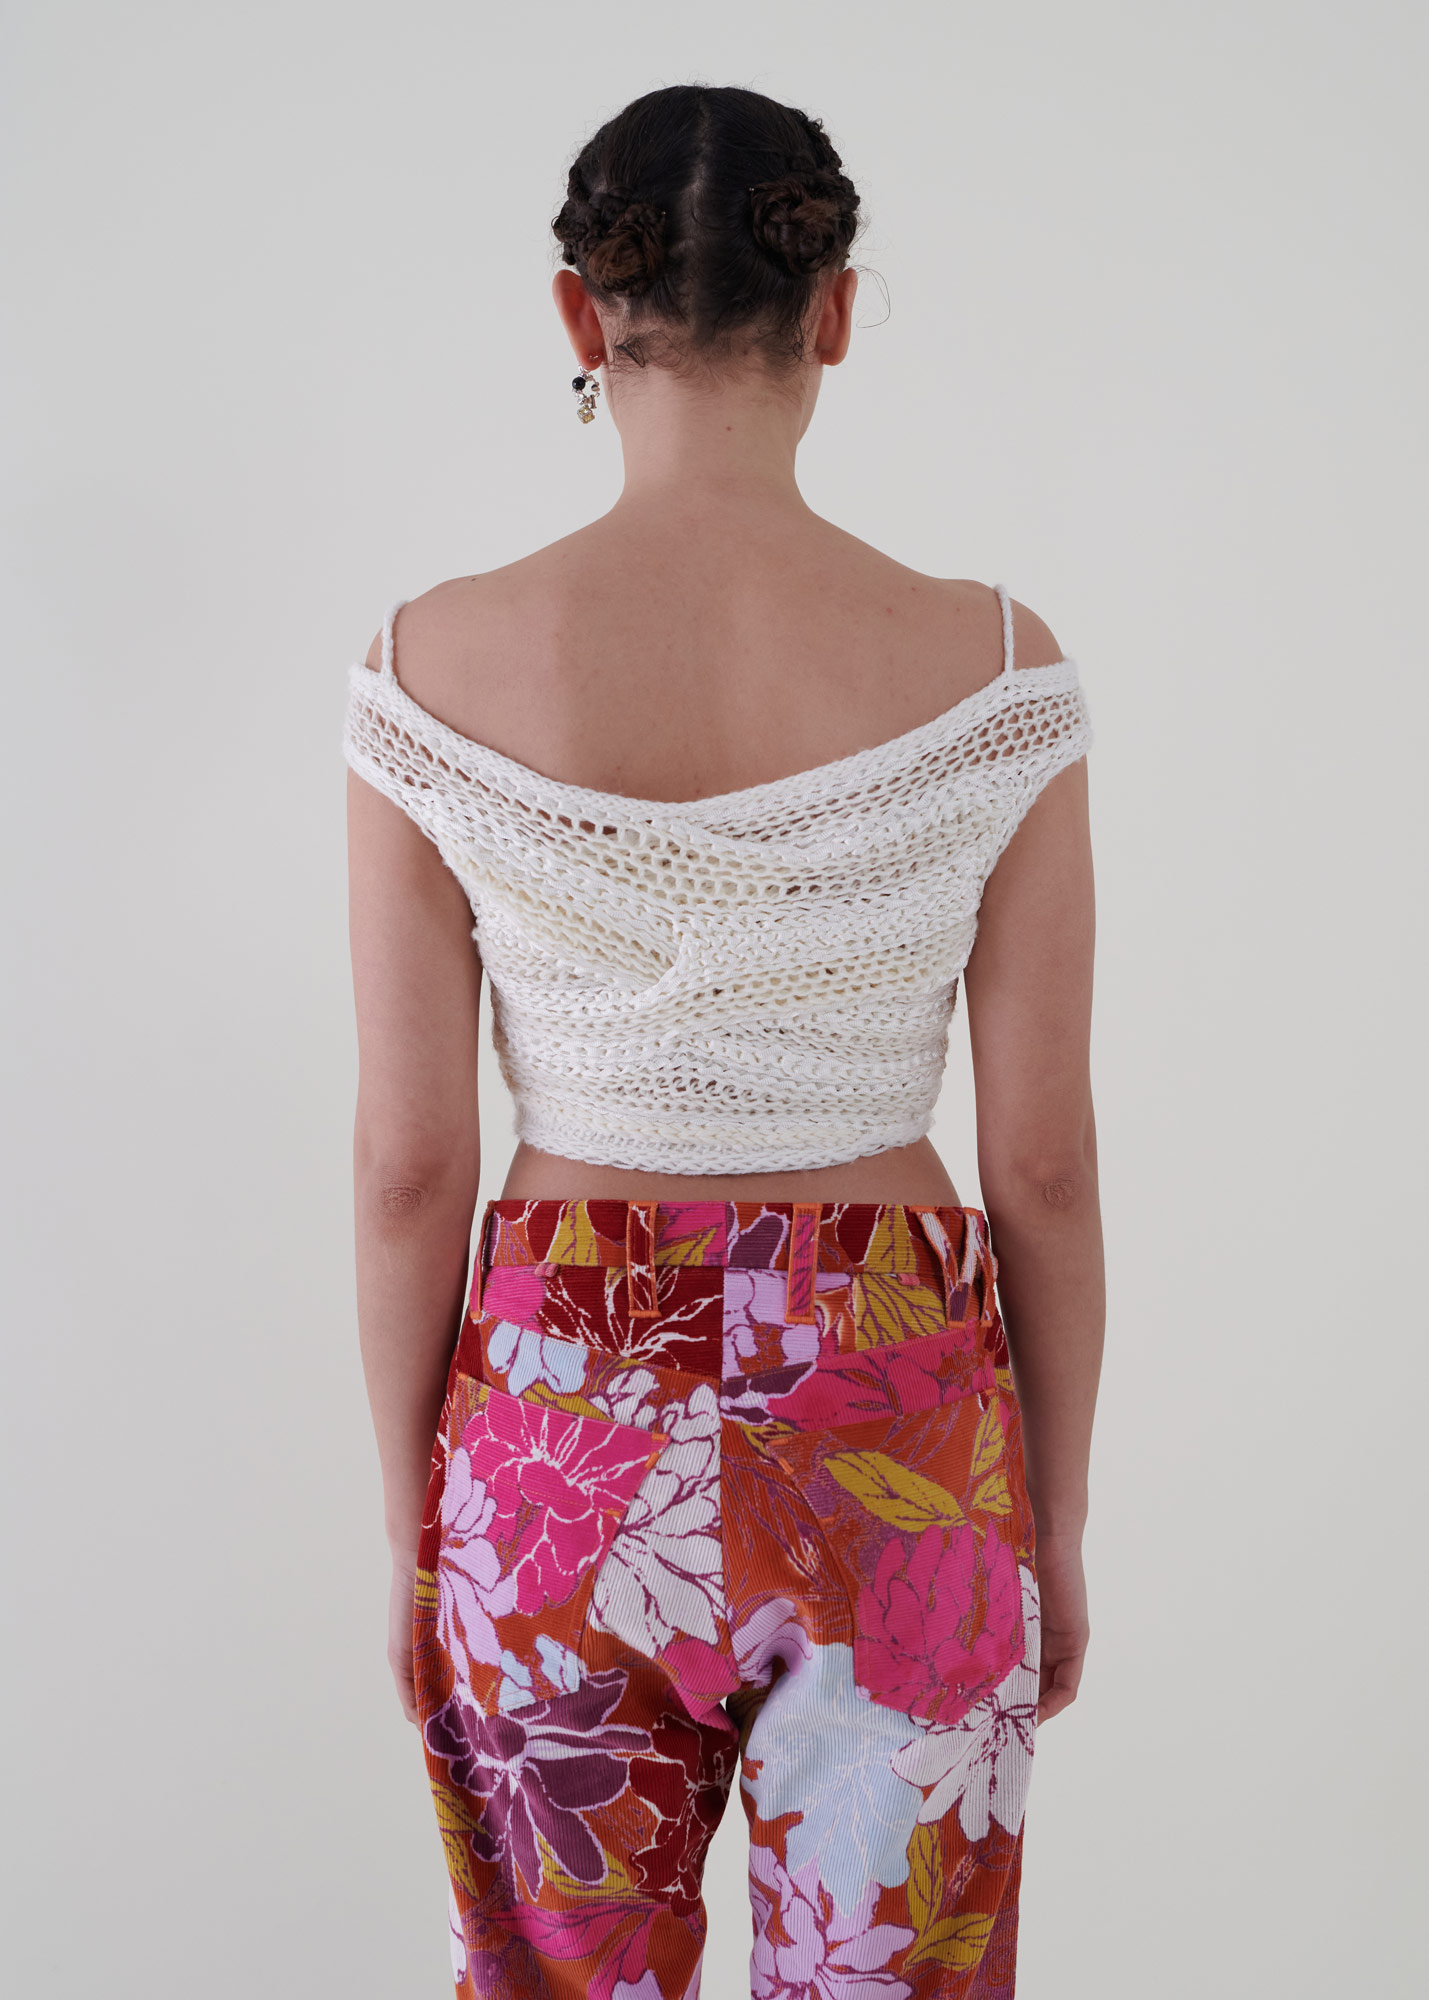 Sustainable fashion with upcycled wool crochet top from Aldwin Teva William